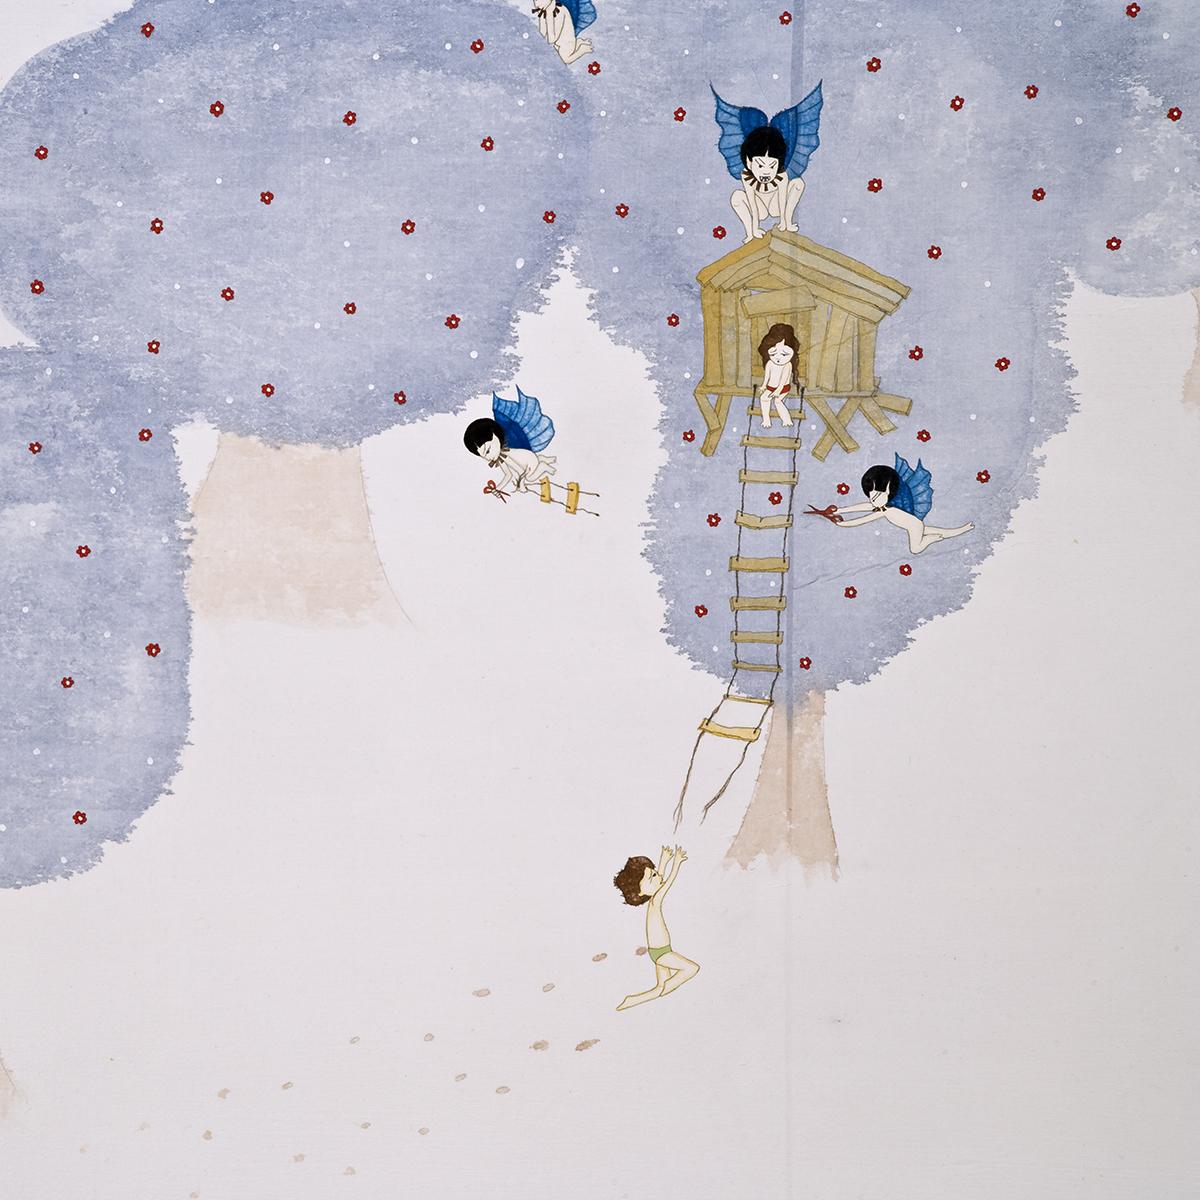 Detail of artwork by Kyung Jeon titled Chapter 3-For the girl, a gift and a duty, 2008, Gouache, graphite, watercolor on rice paper on canvas, 43.75 x 69.75 inches, 111.1 x 177.2 cm